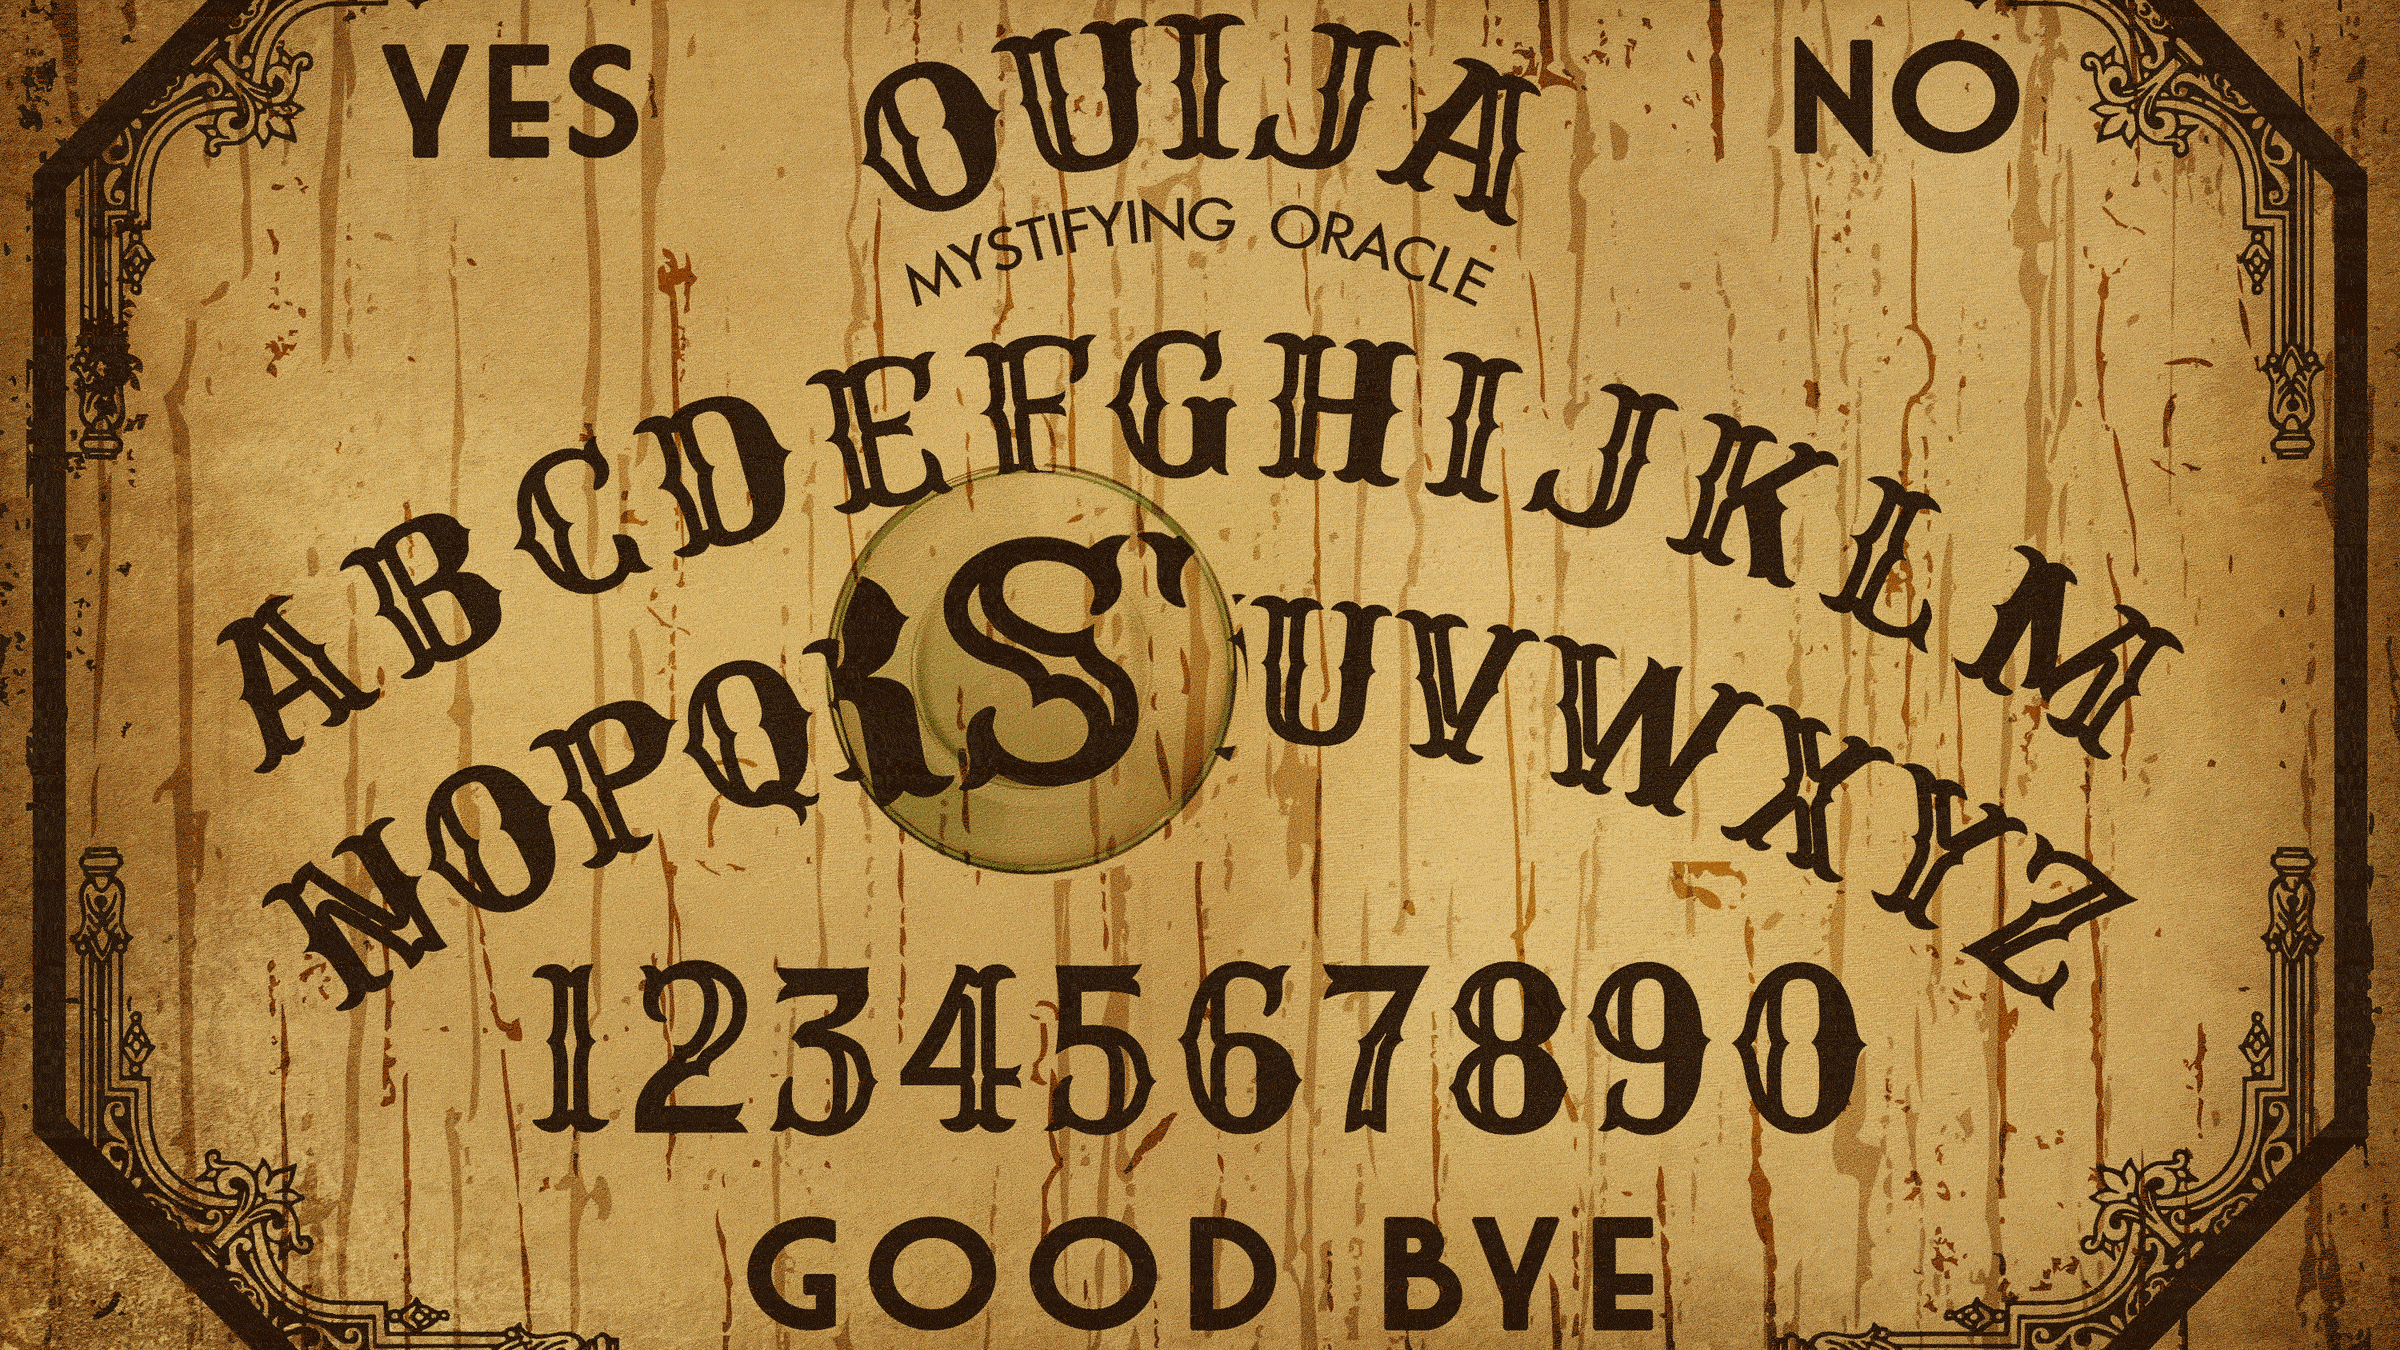 How Two World War I POWs Conned Their Way Out With a Ouija Board image pic